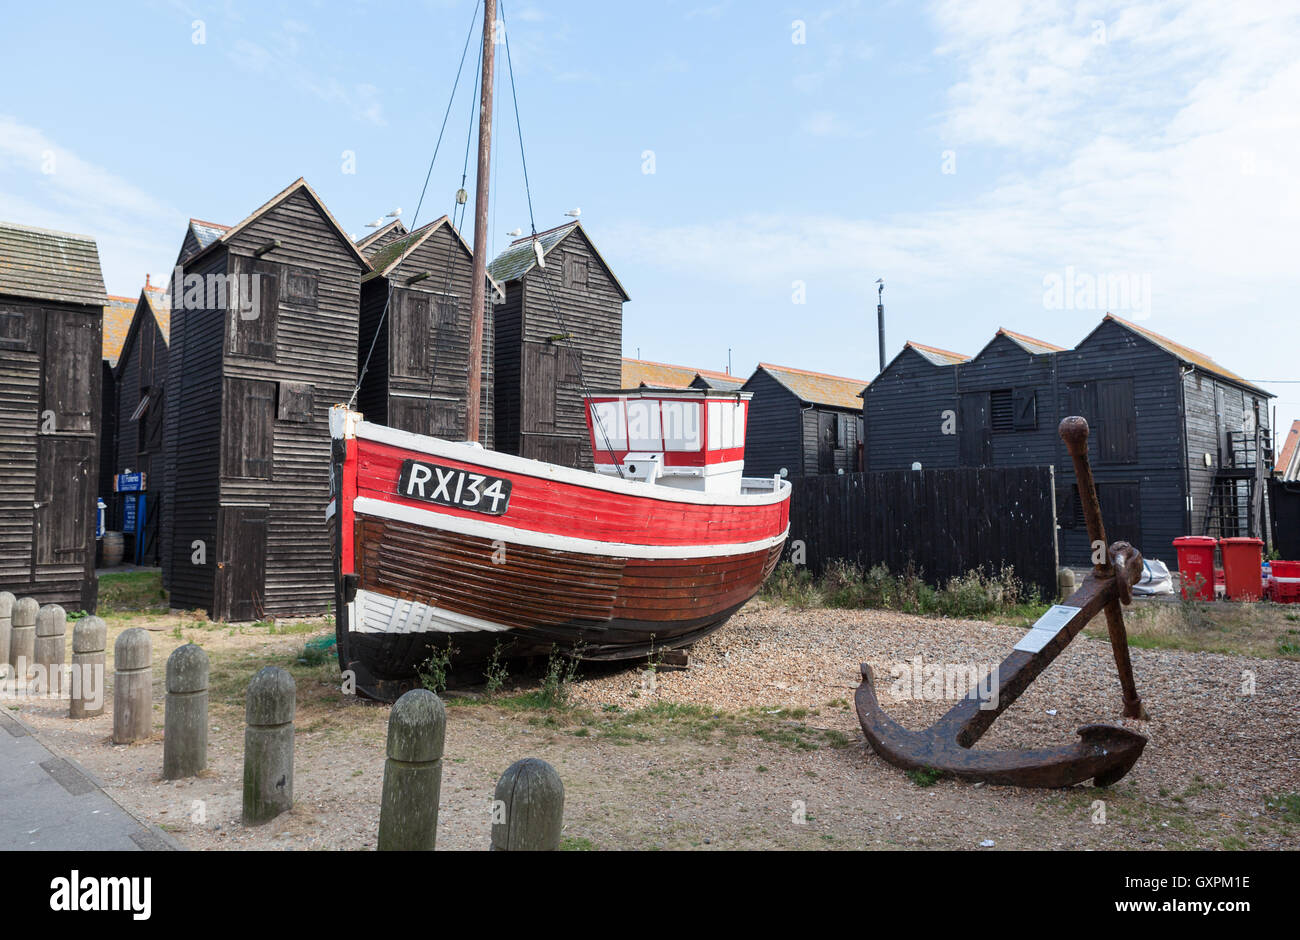 A view of the wooden Fishing Sheds, Boat and Net Shops on the seafront in Hastings. Stock Photo